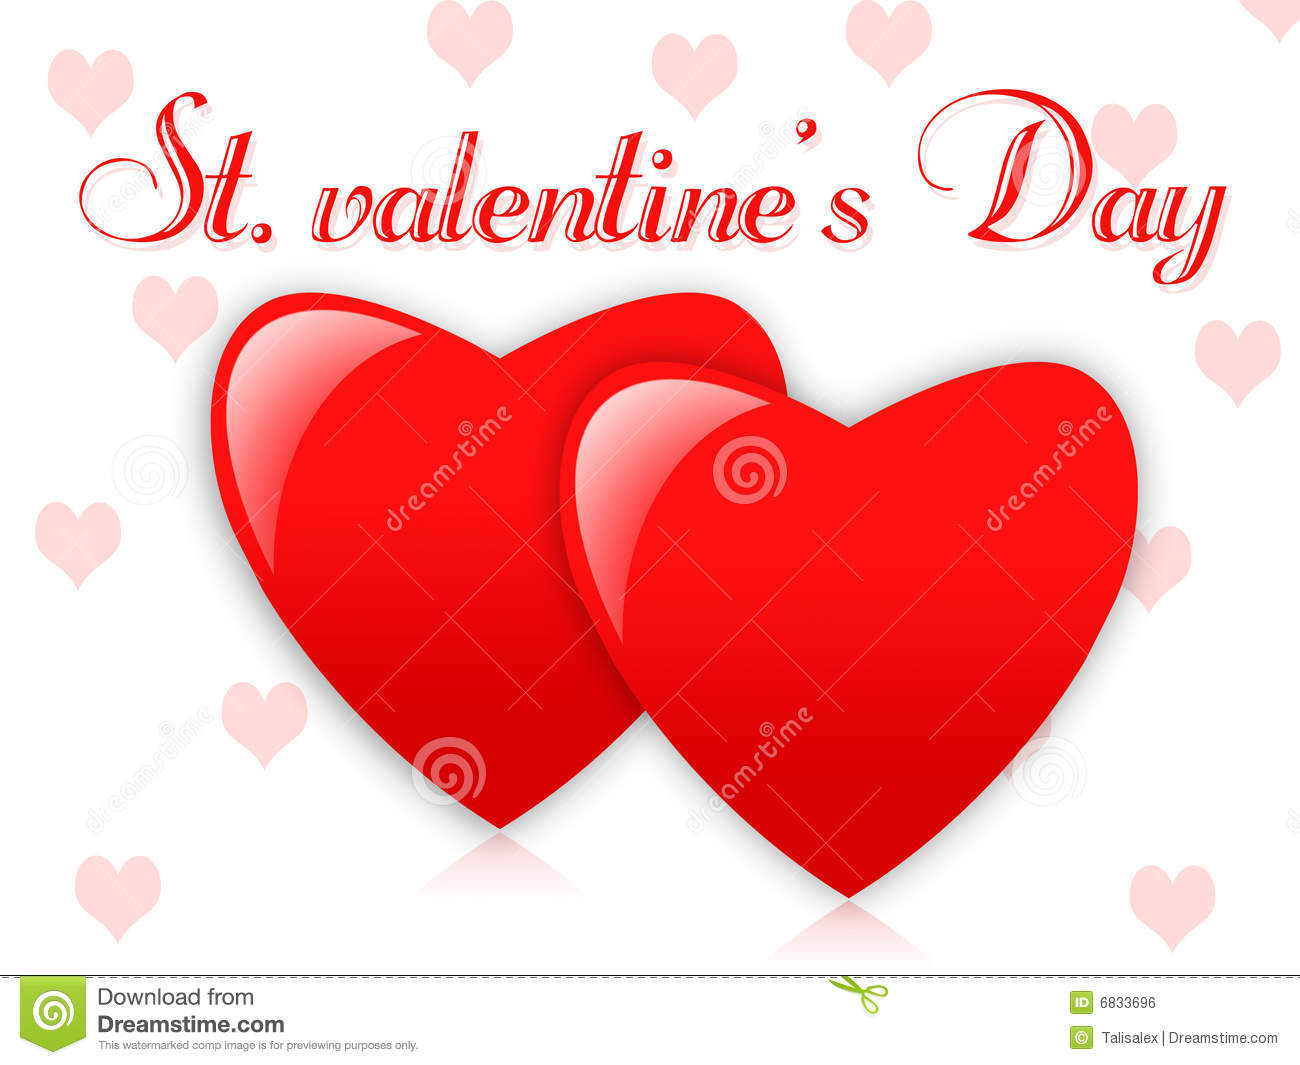 St  Valentines Day Royalty Free Stock Image   Image  6833696